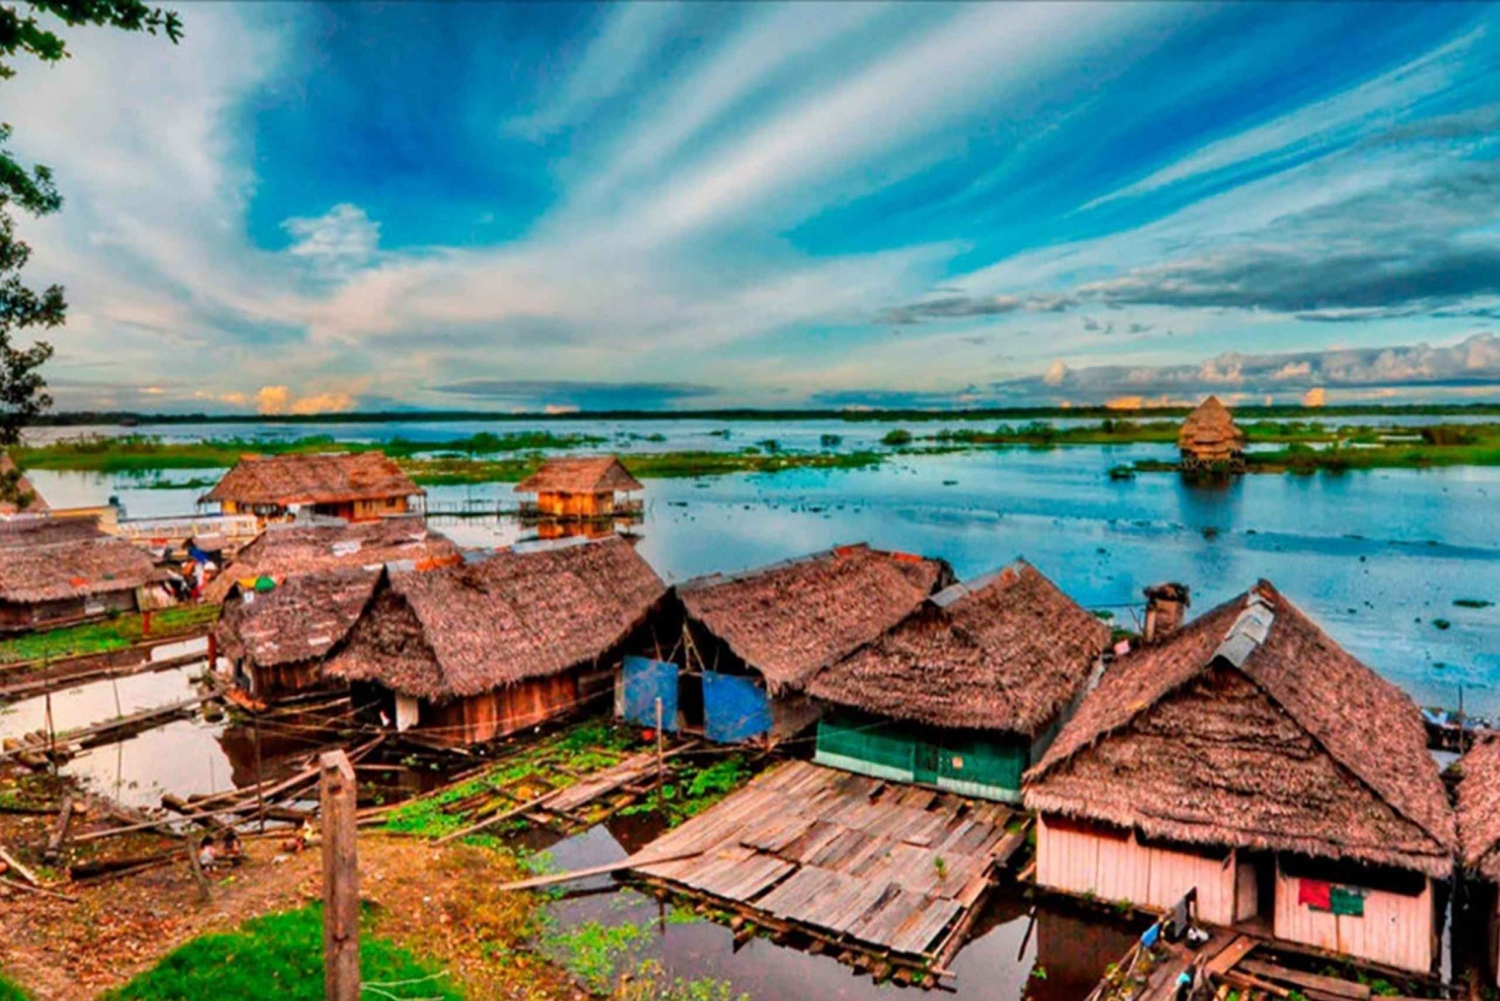 Offer Monkey Island in the Amazon River Iquitos Peru